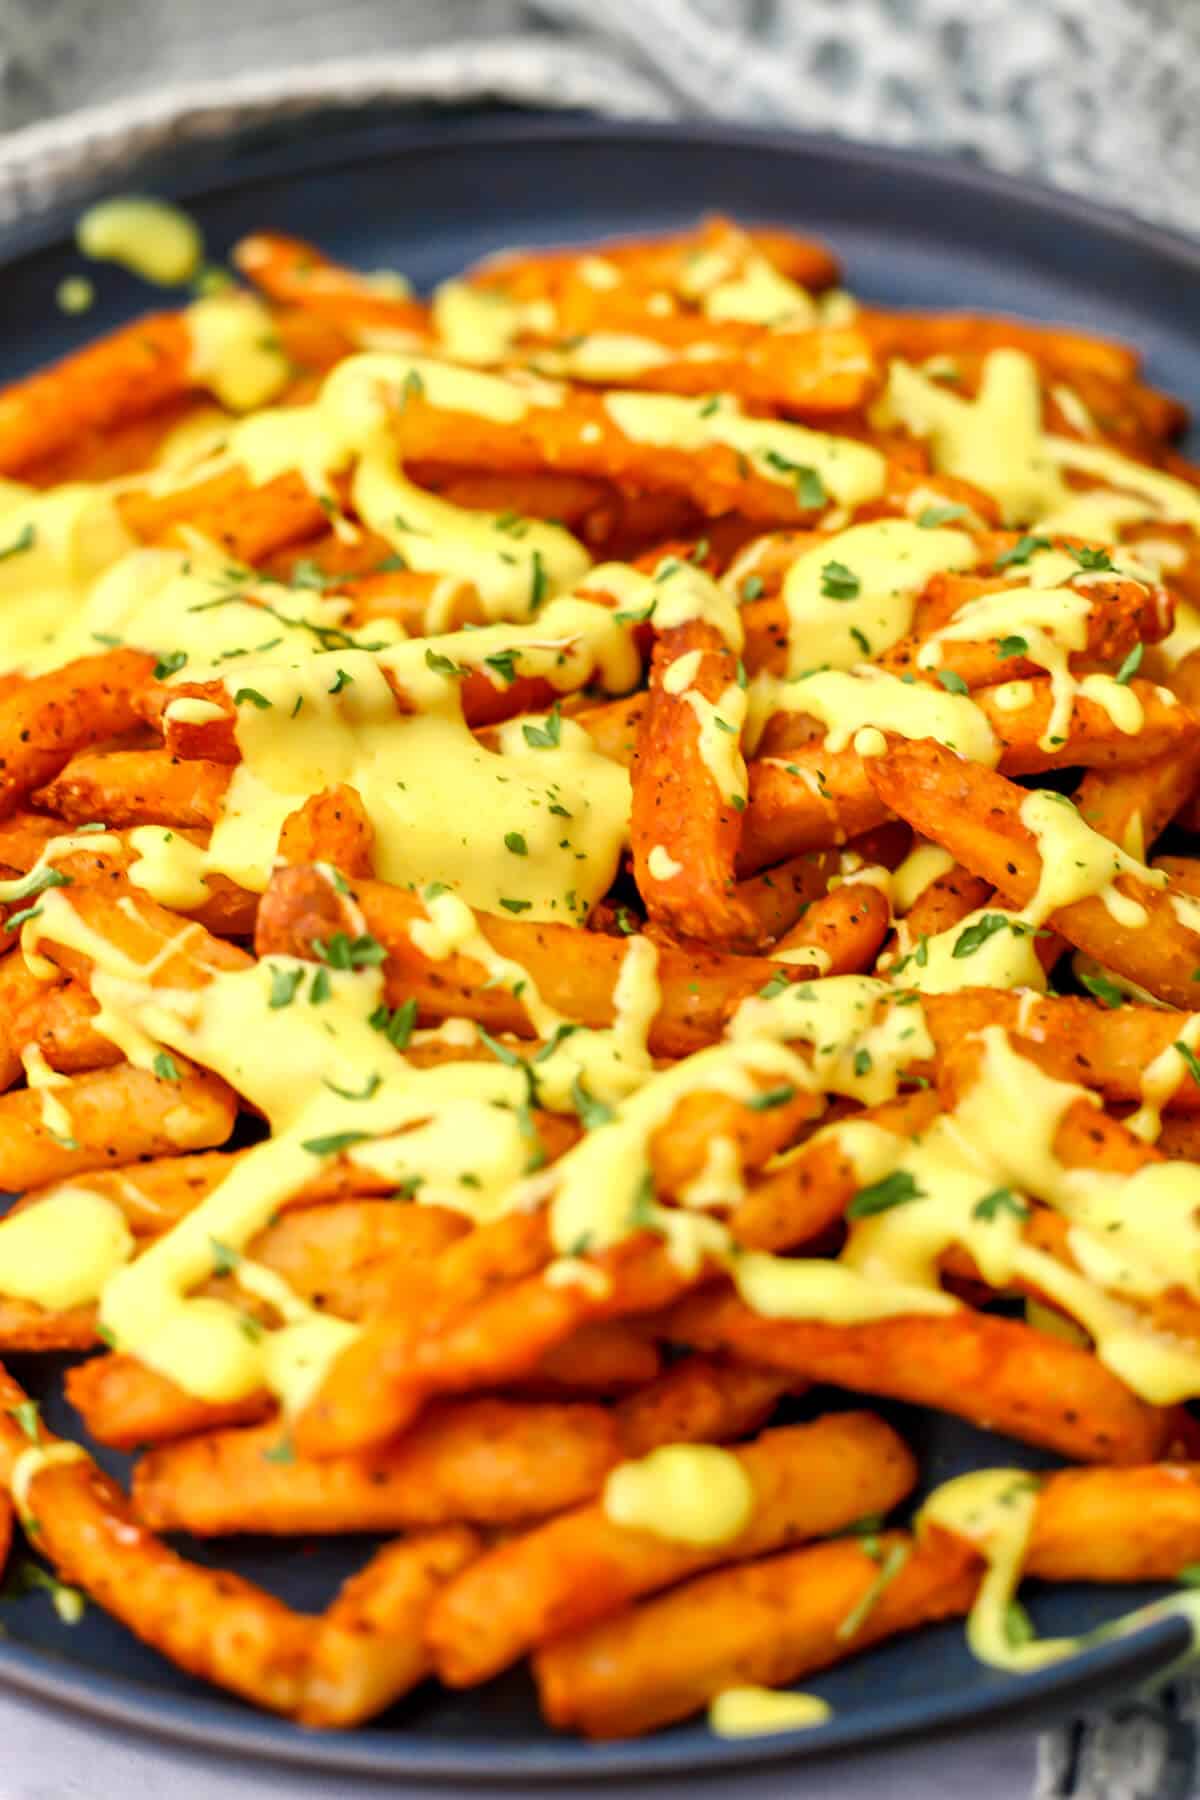 Vegan cheese sauce poured over French fries.